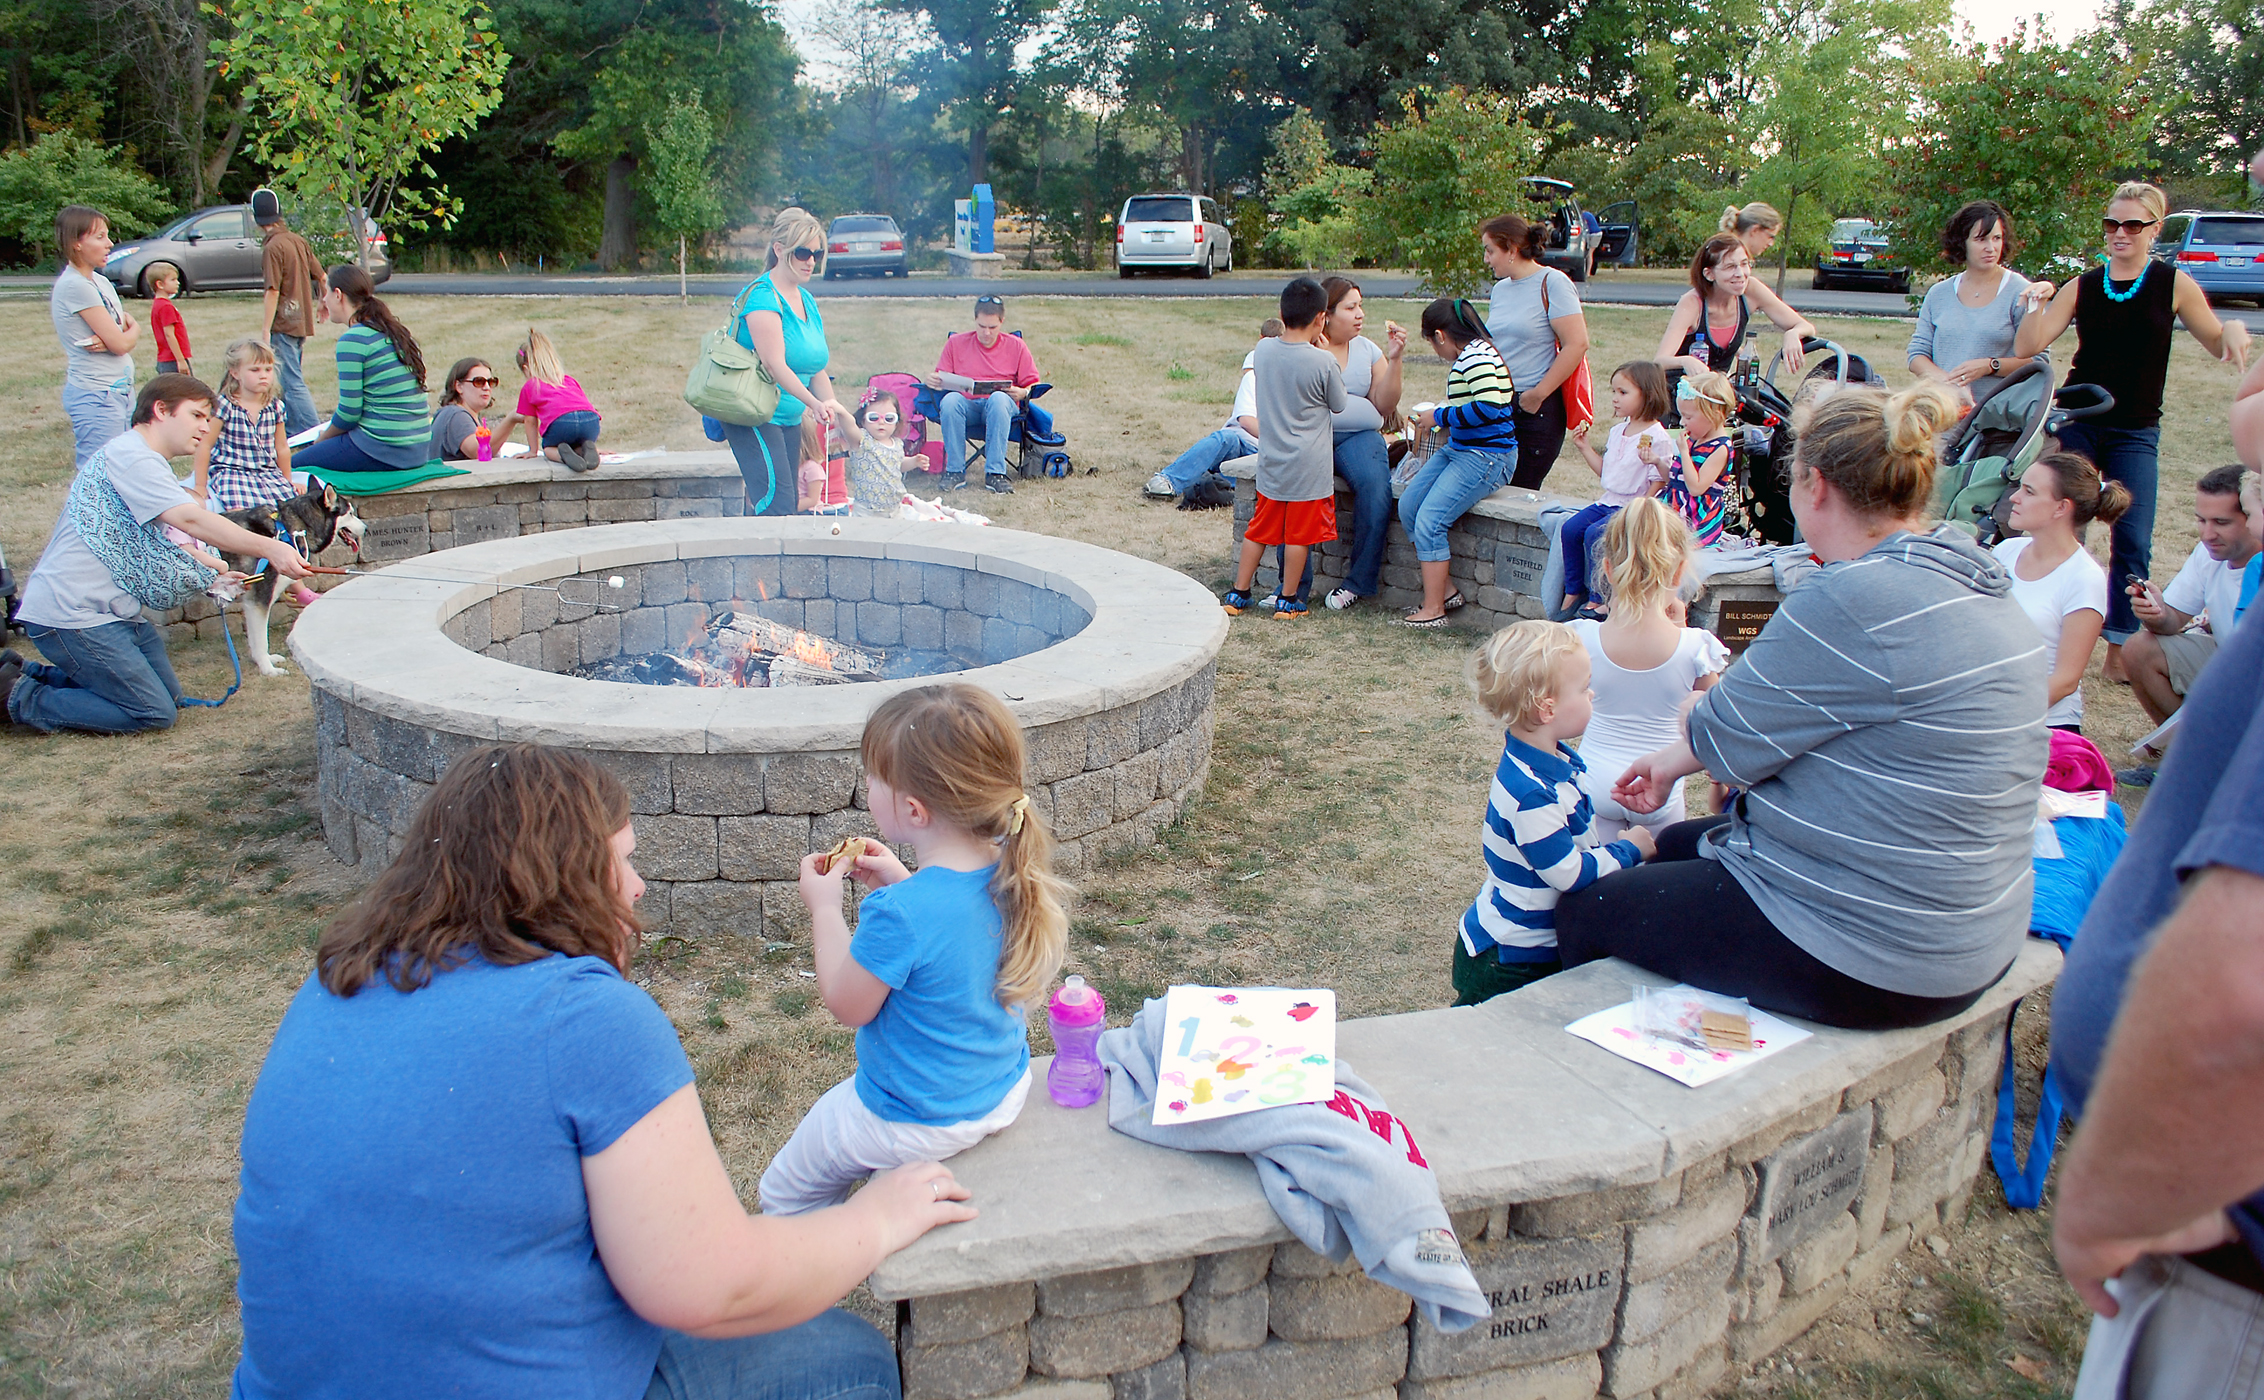 Parents and children gather around the Council Circle Fire Pit at Simon Moon Park eating s’mores before Vicki Parker’s story telling last year.